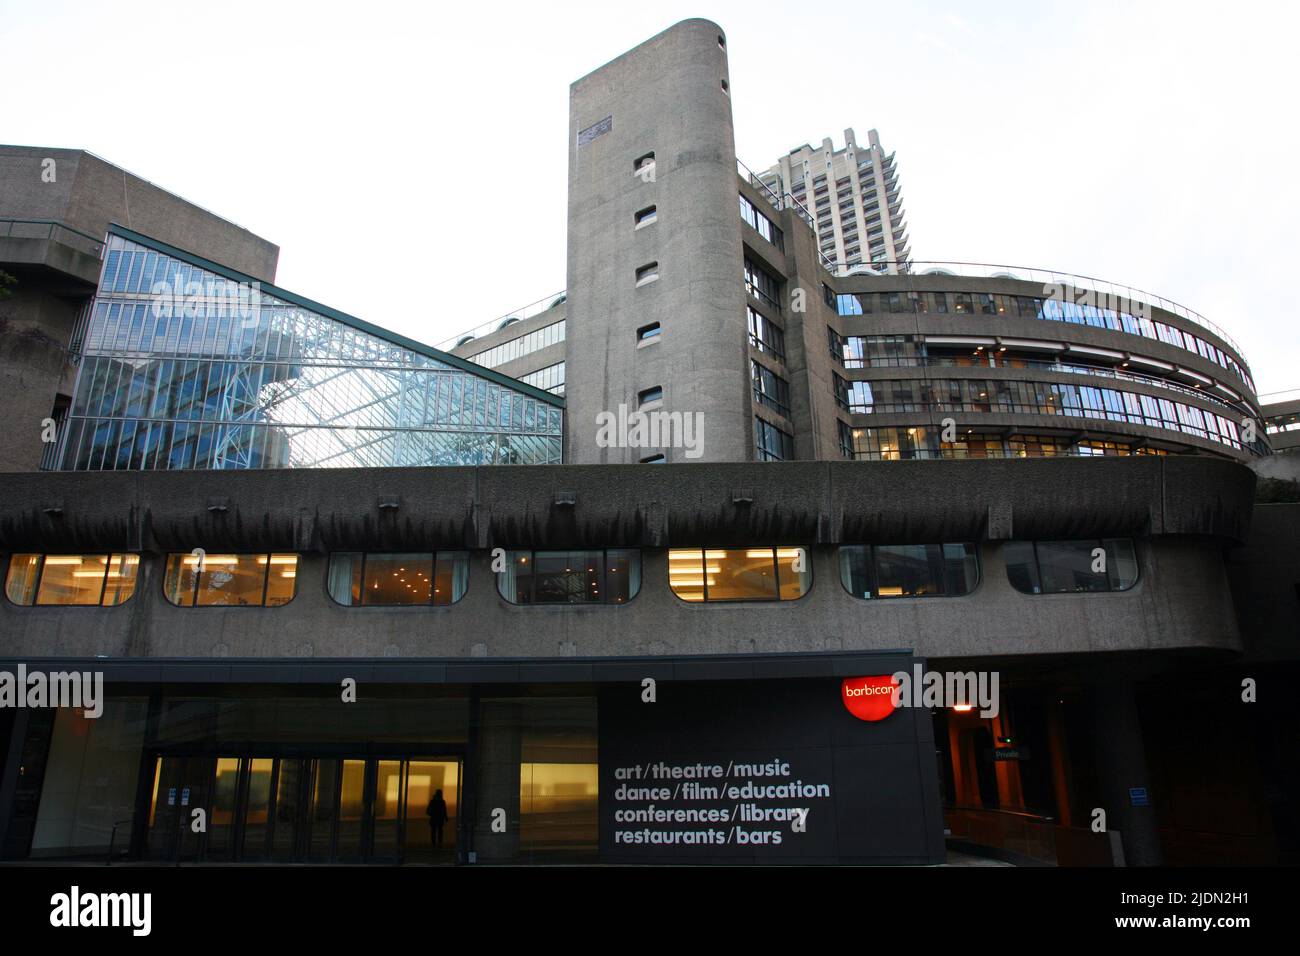 LONDON - FEB 14: Main entrance of Barbican Center, the largest performing arts centre in Europe, designed by Chamberlin, Powell and Bon, opened 1982. Stock Photo